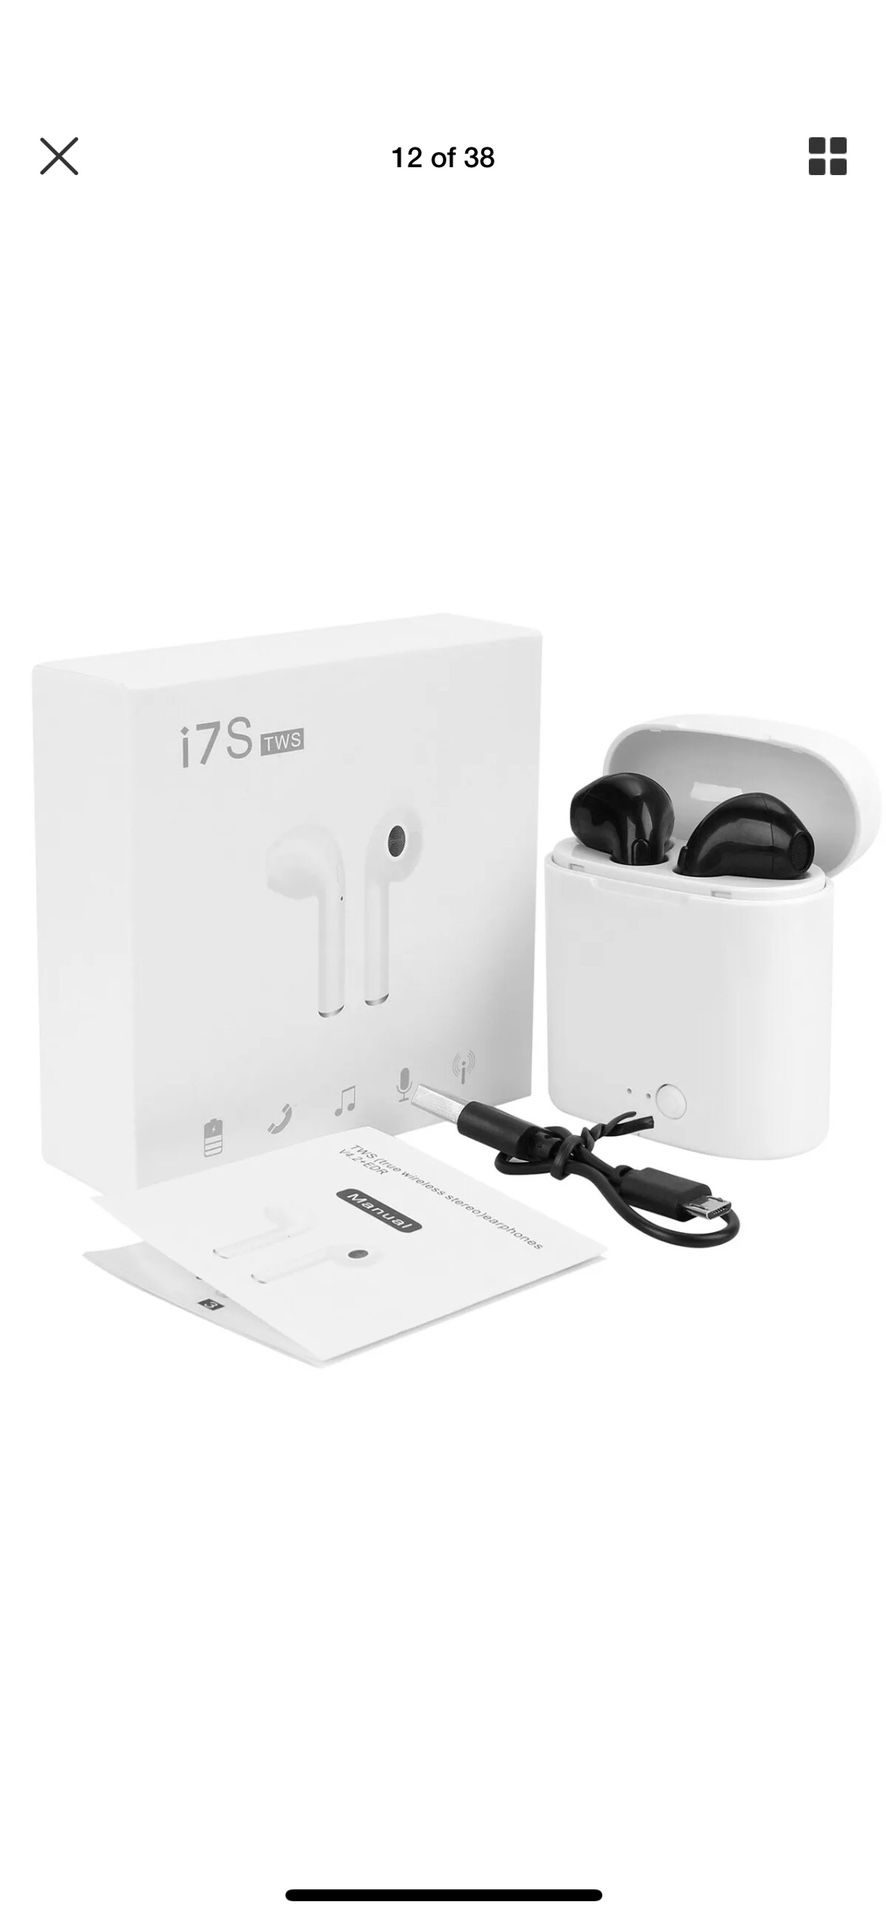 New I7s Black Bluetooth headphones wireless earbuds audifonos audiculares for sale. Shipping only